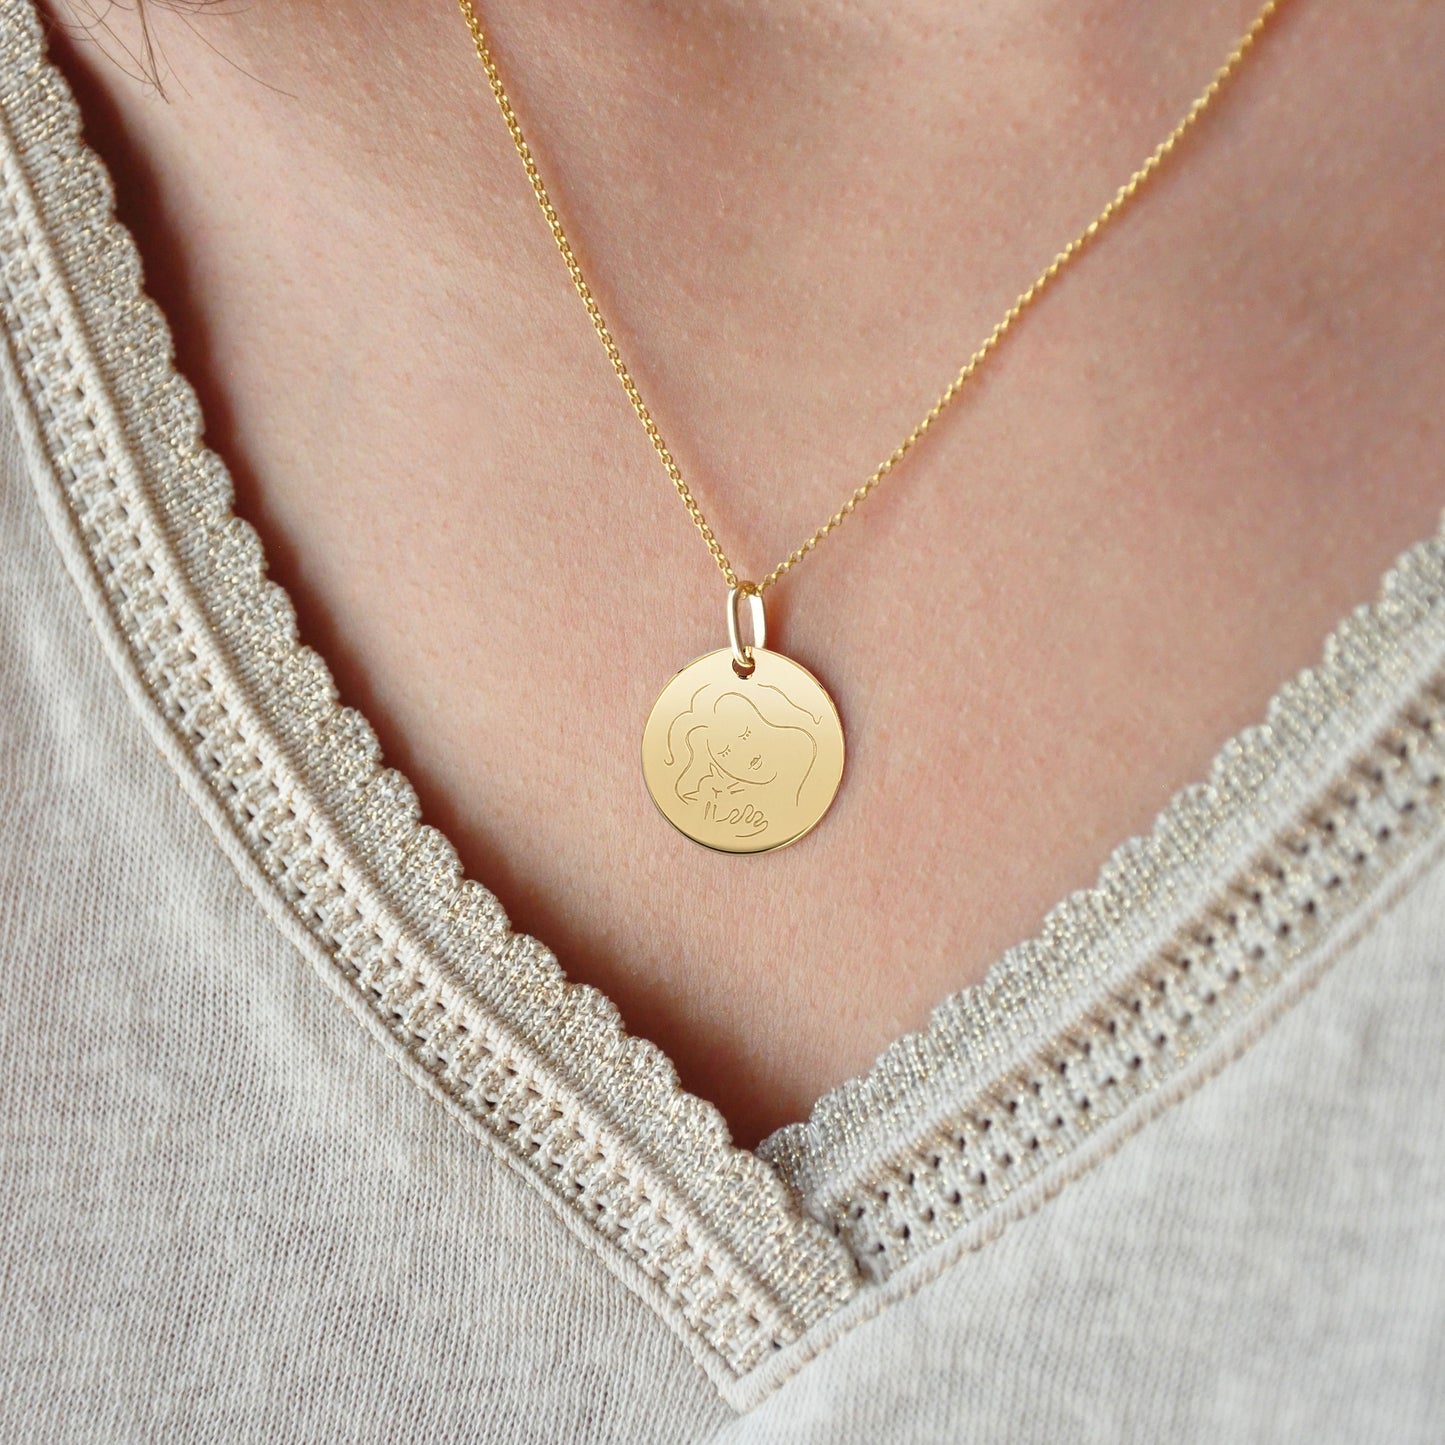 Muze 18k gold vermeil cat medal necklace, art inspired jewelry, dainty talisman symbol of love and affection. Meaningful sentimental gift perfect for cat lovers or as a friendship gift.